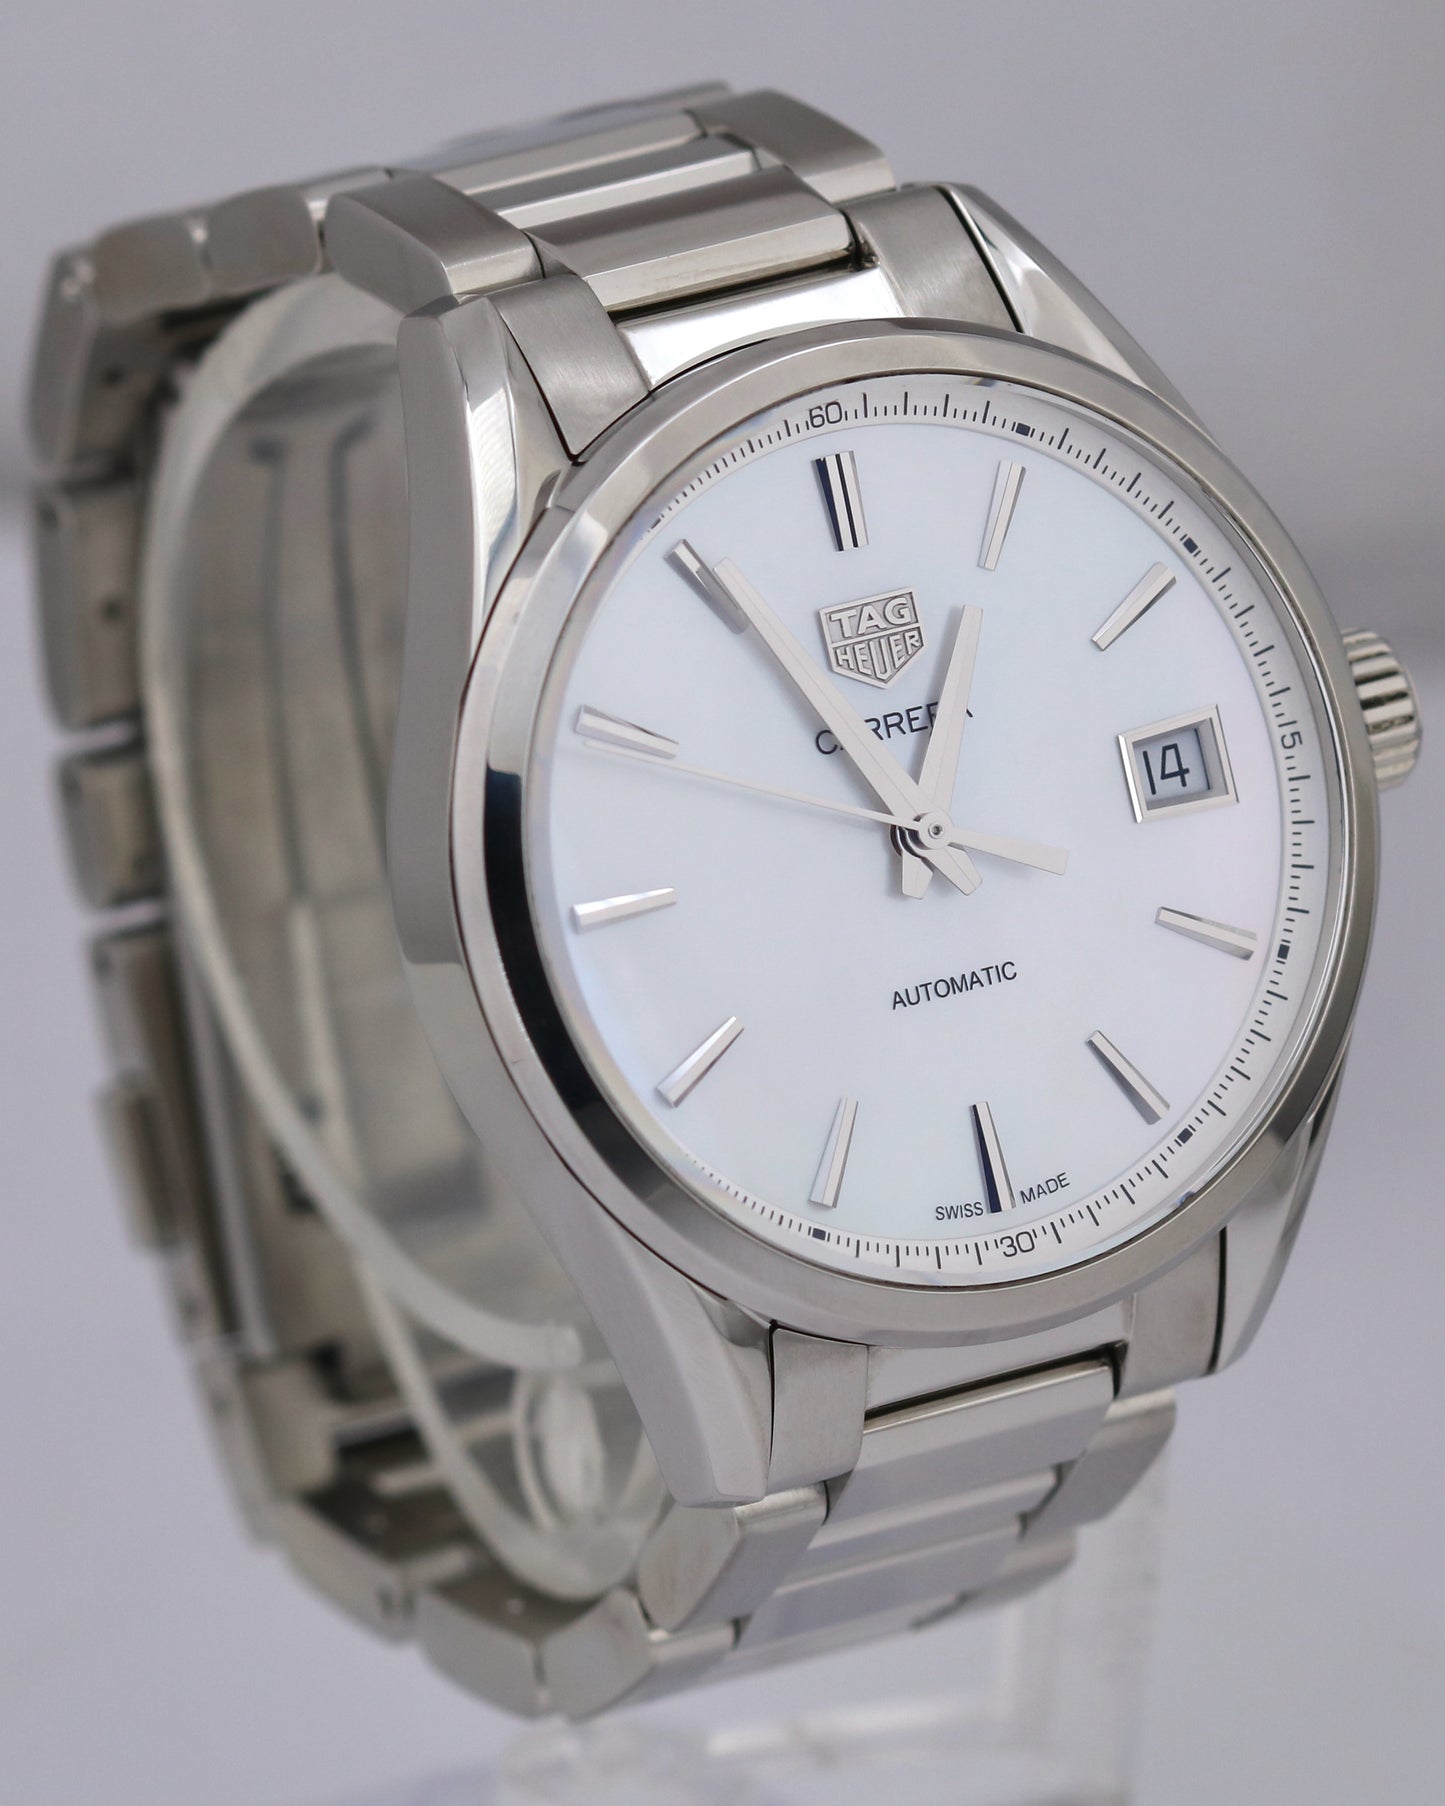 2023 PAPERS Tag Heuer Carrera White MOTHER OF PEARL 36mm WBK2311.BA0652 Watch